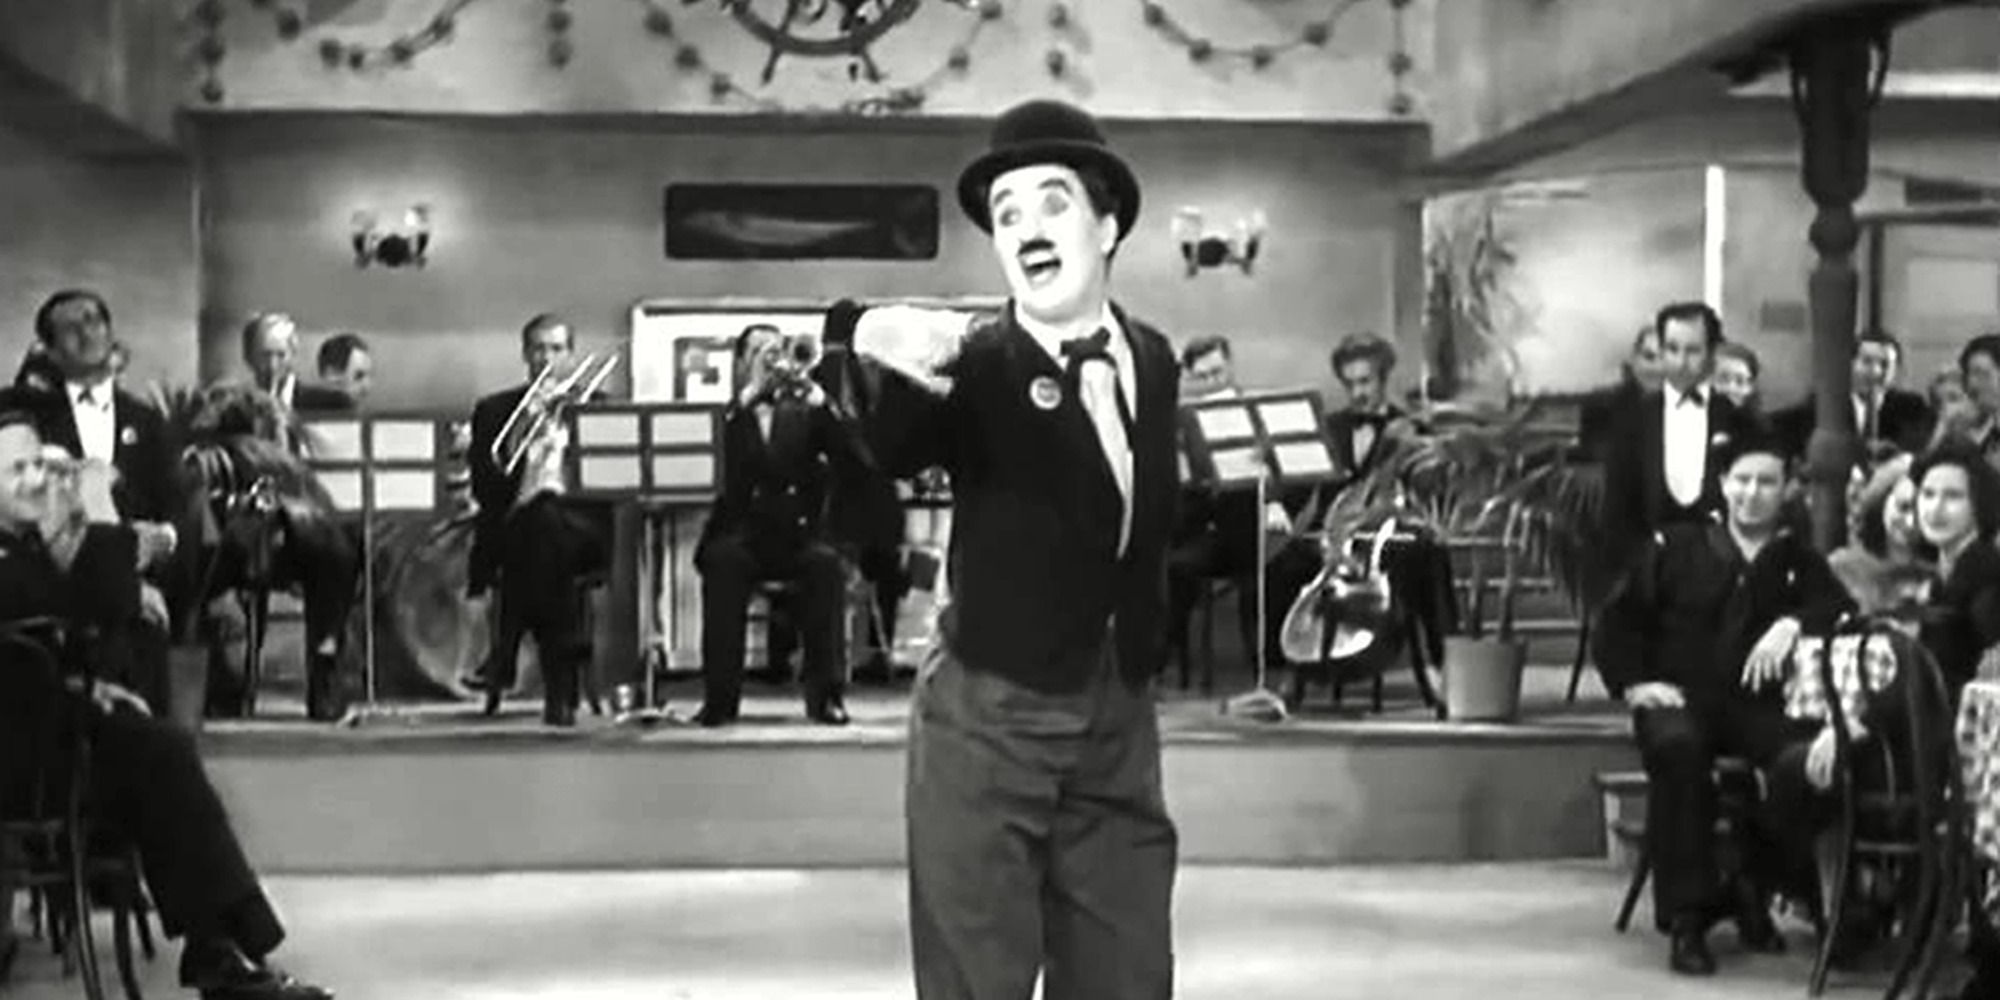 The Tramp singing a song with a band playing behind him and a crowd watching